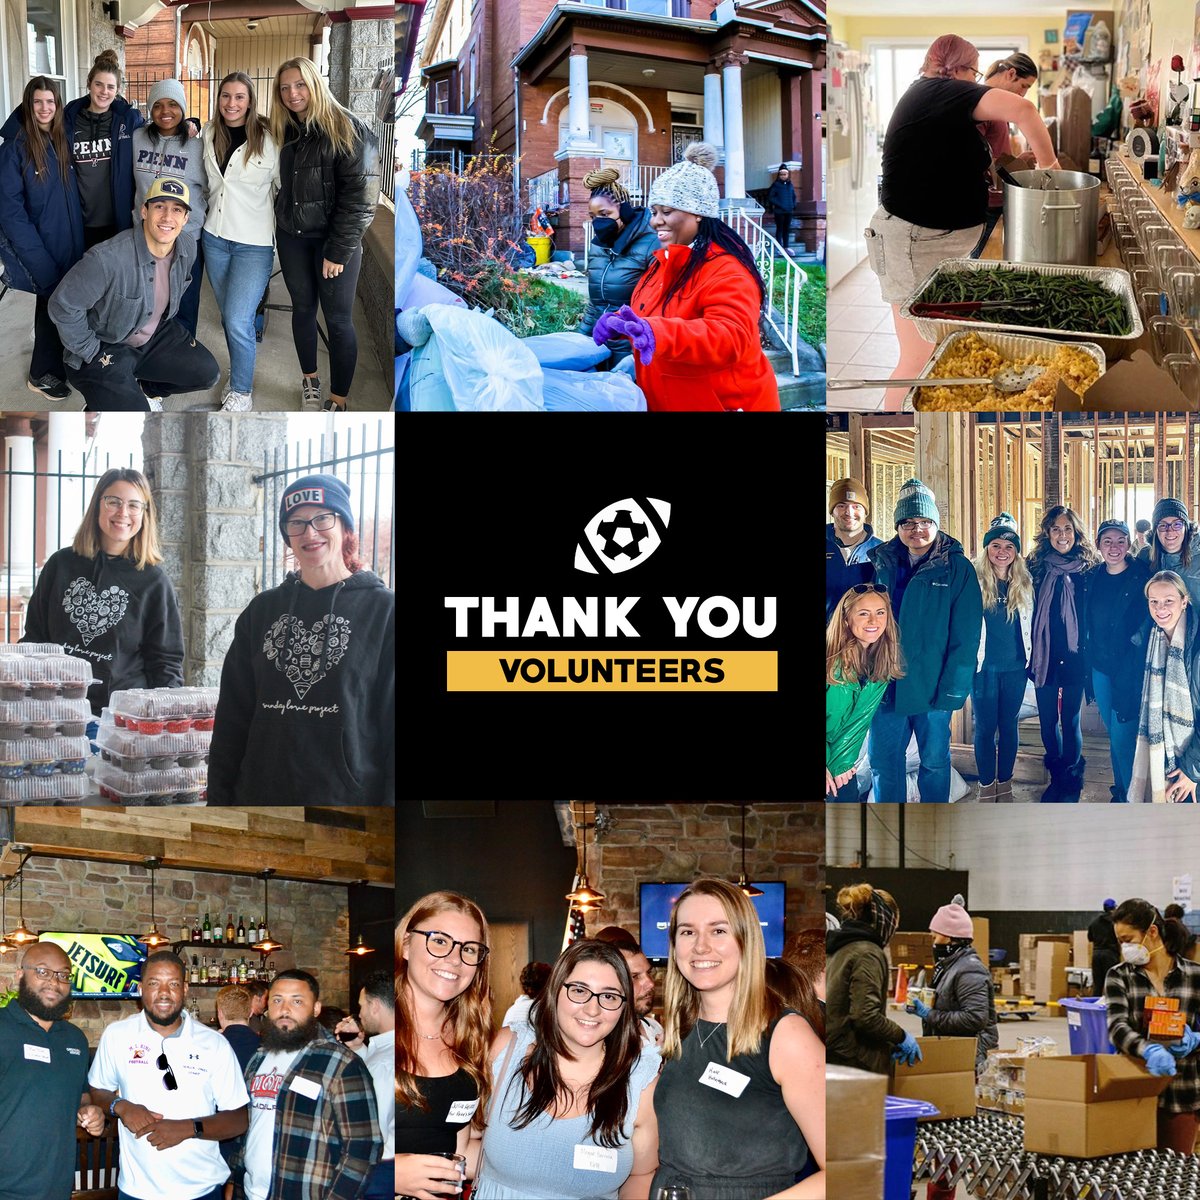 Celebrating #VolunteerRecognitionDay with immense gratitude for all the incredible people who have supported and helped our foundation. We couldn’t do what we do in the community without your help. #Grateful